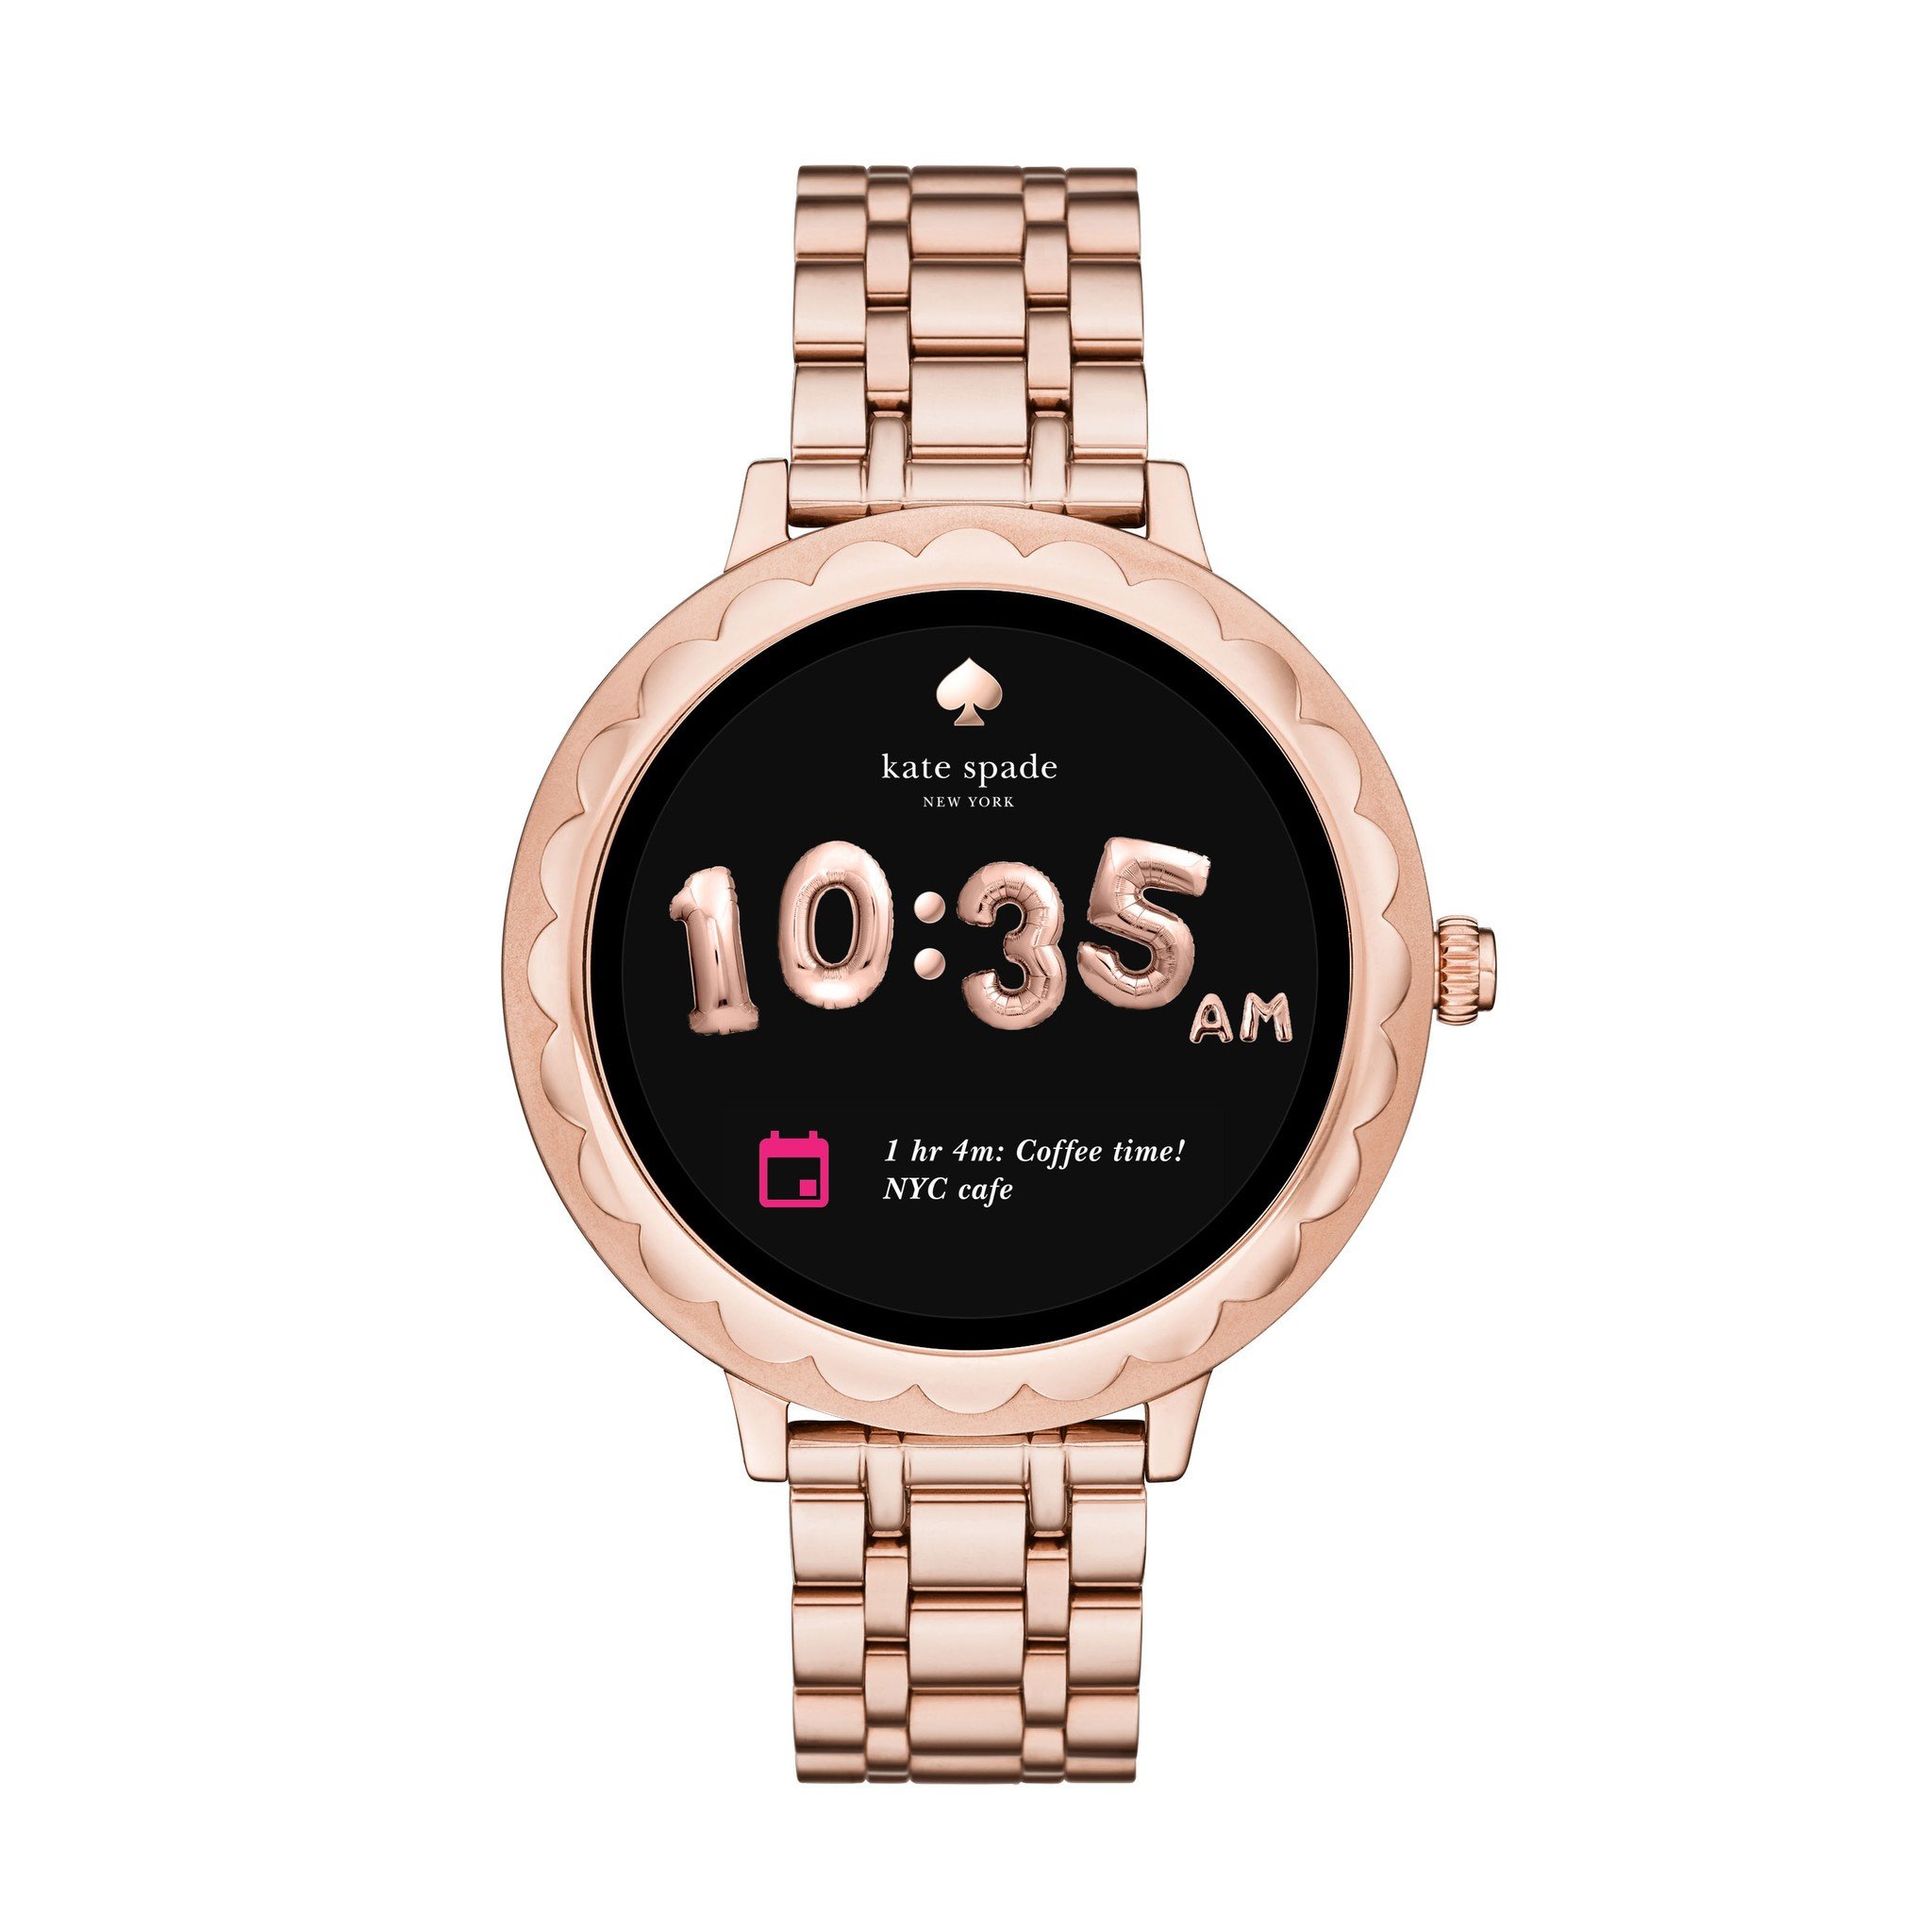 Kate Spade New York Android Wear watch